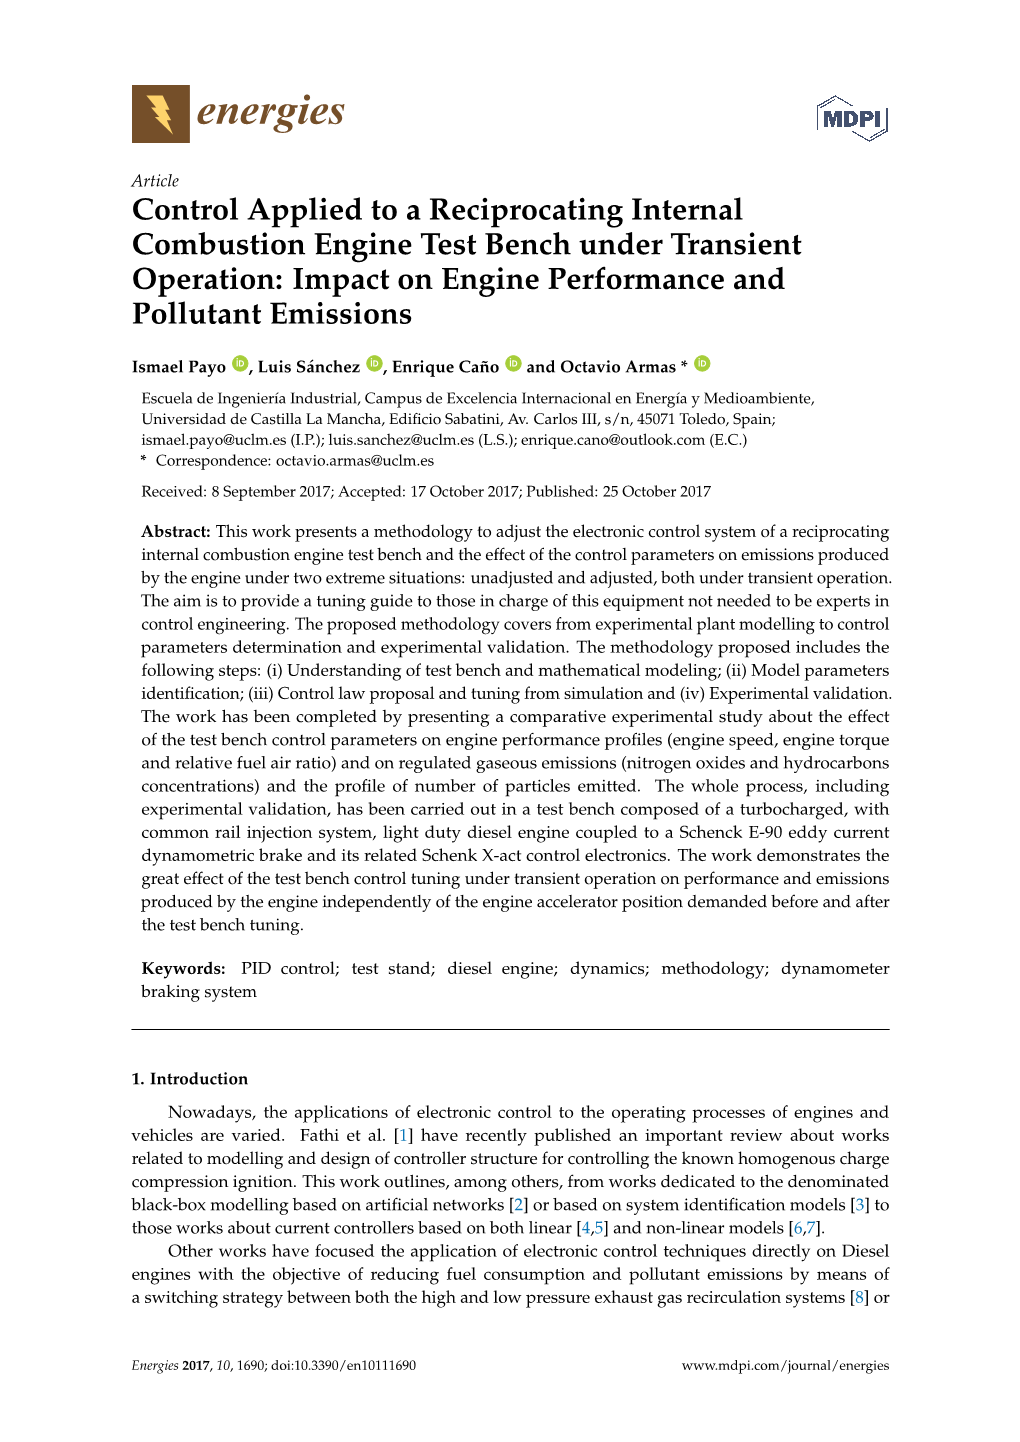 Control Applied to a Reciprocating Internal Combustion Engine Test Bench Under Transient Operation: Impact on Engine Performance and Pollutant Emissions